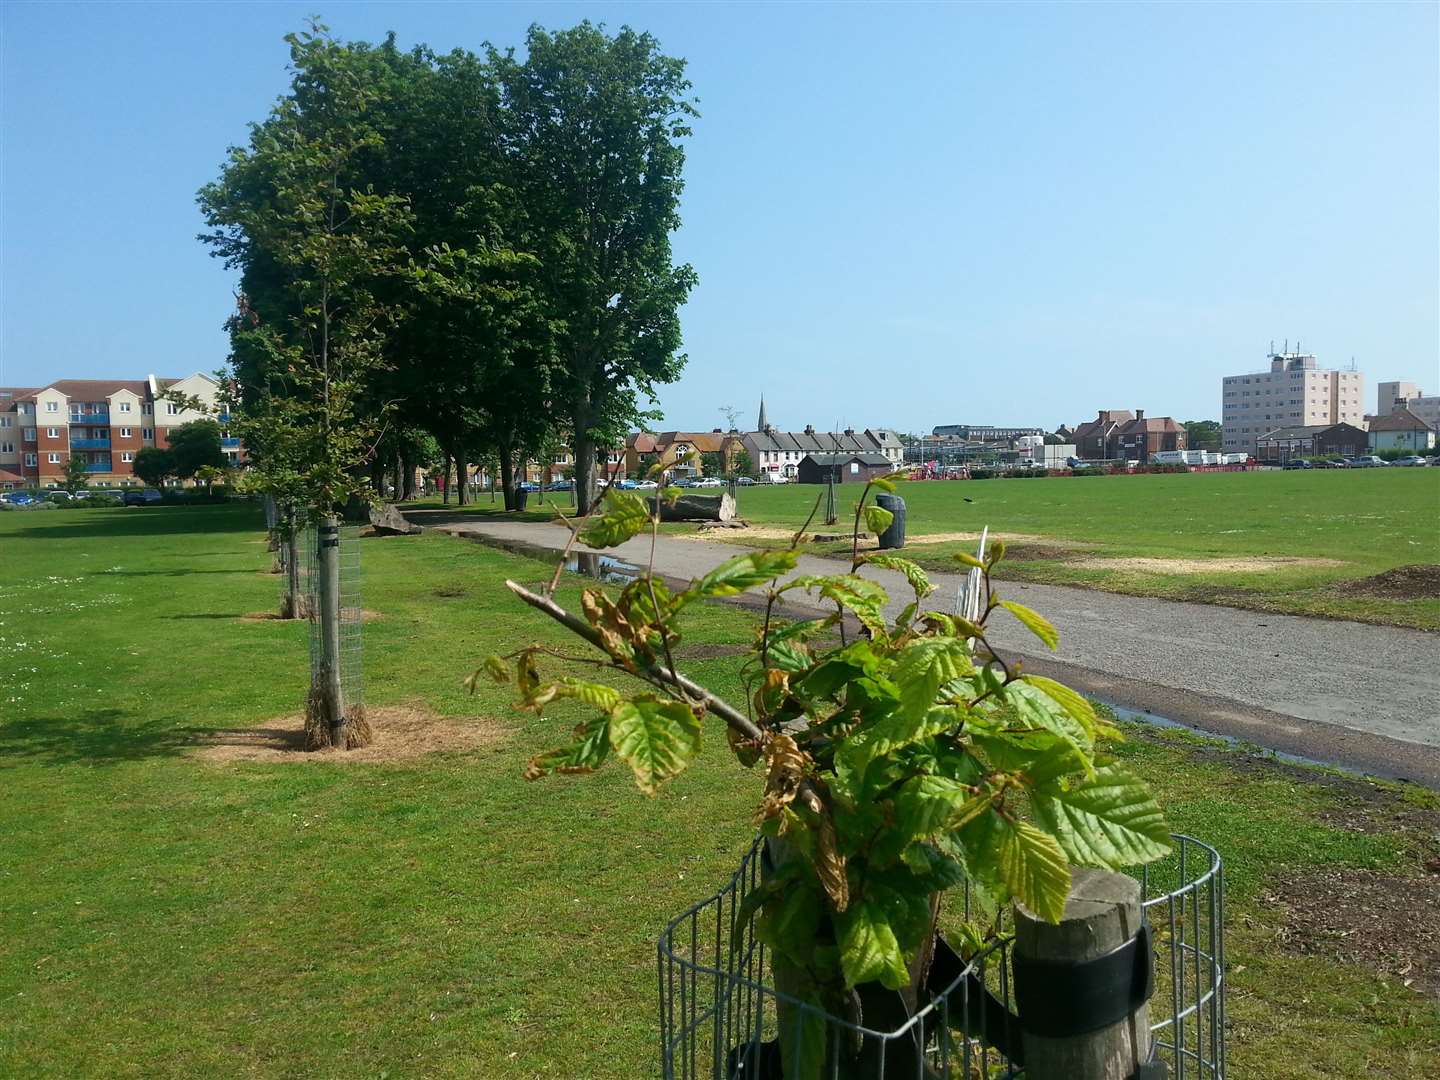 The incident took place in Memorial Park, Herne Bay, yesterday afternoon